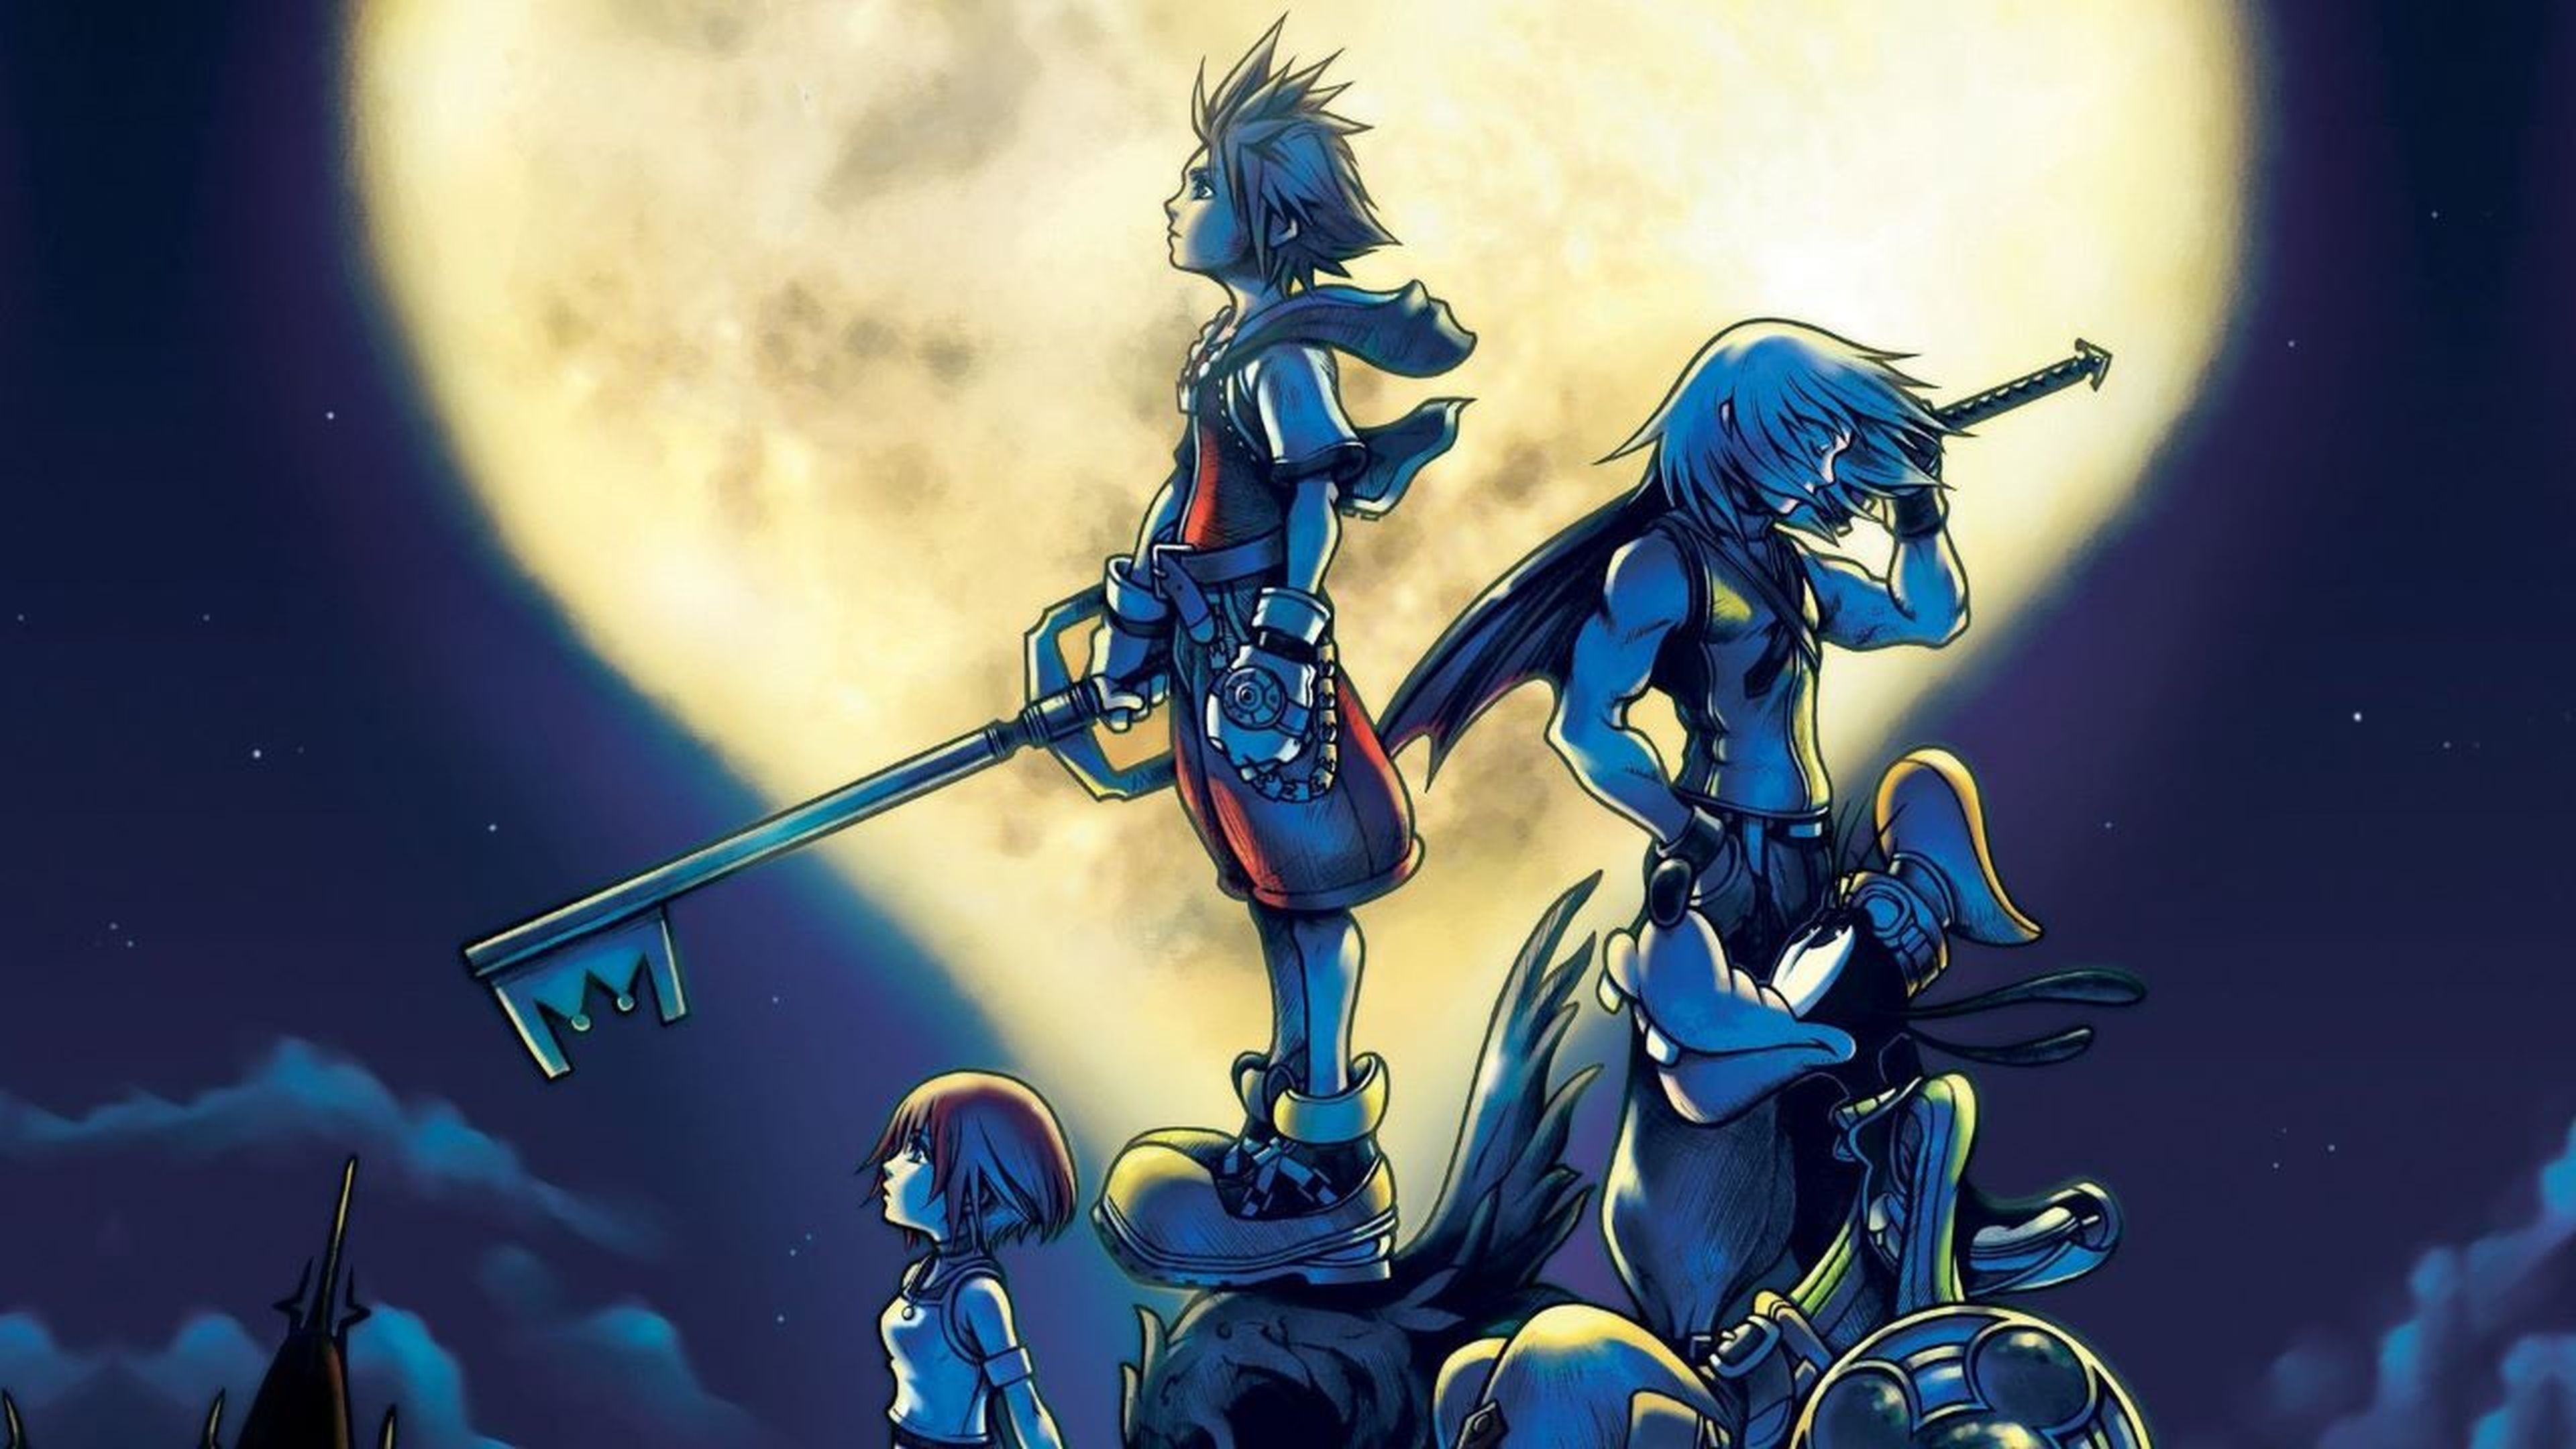 Kingdom Hearts Games Ranked Worst to Best